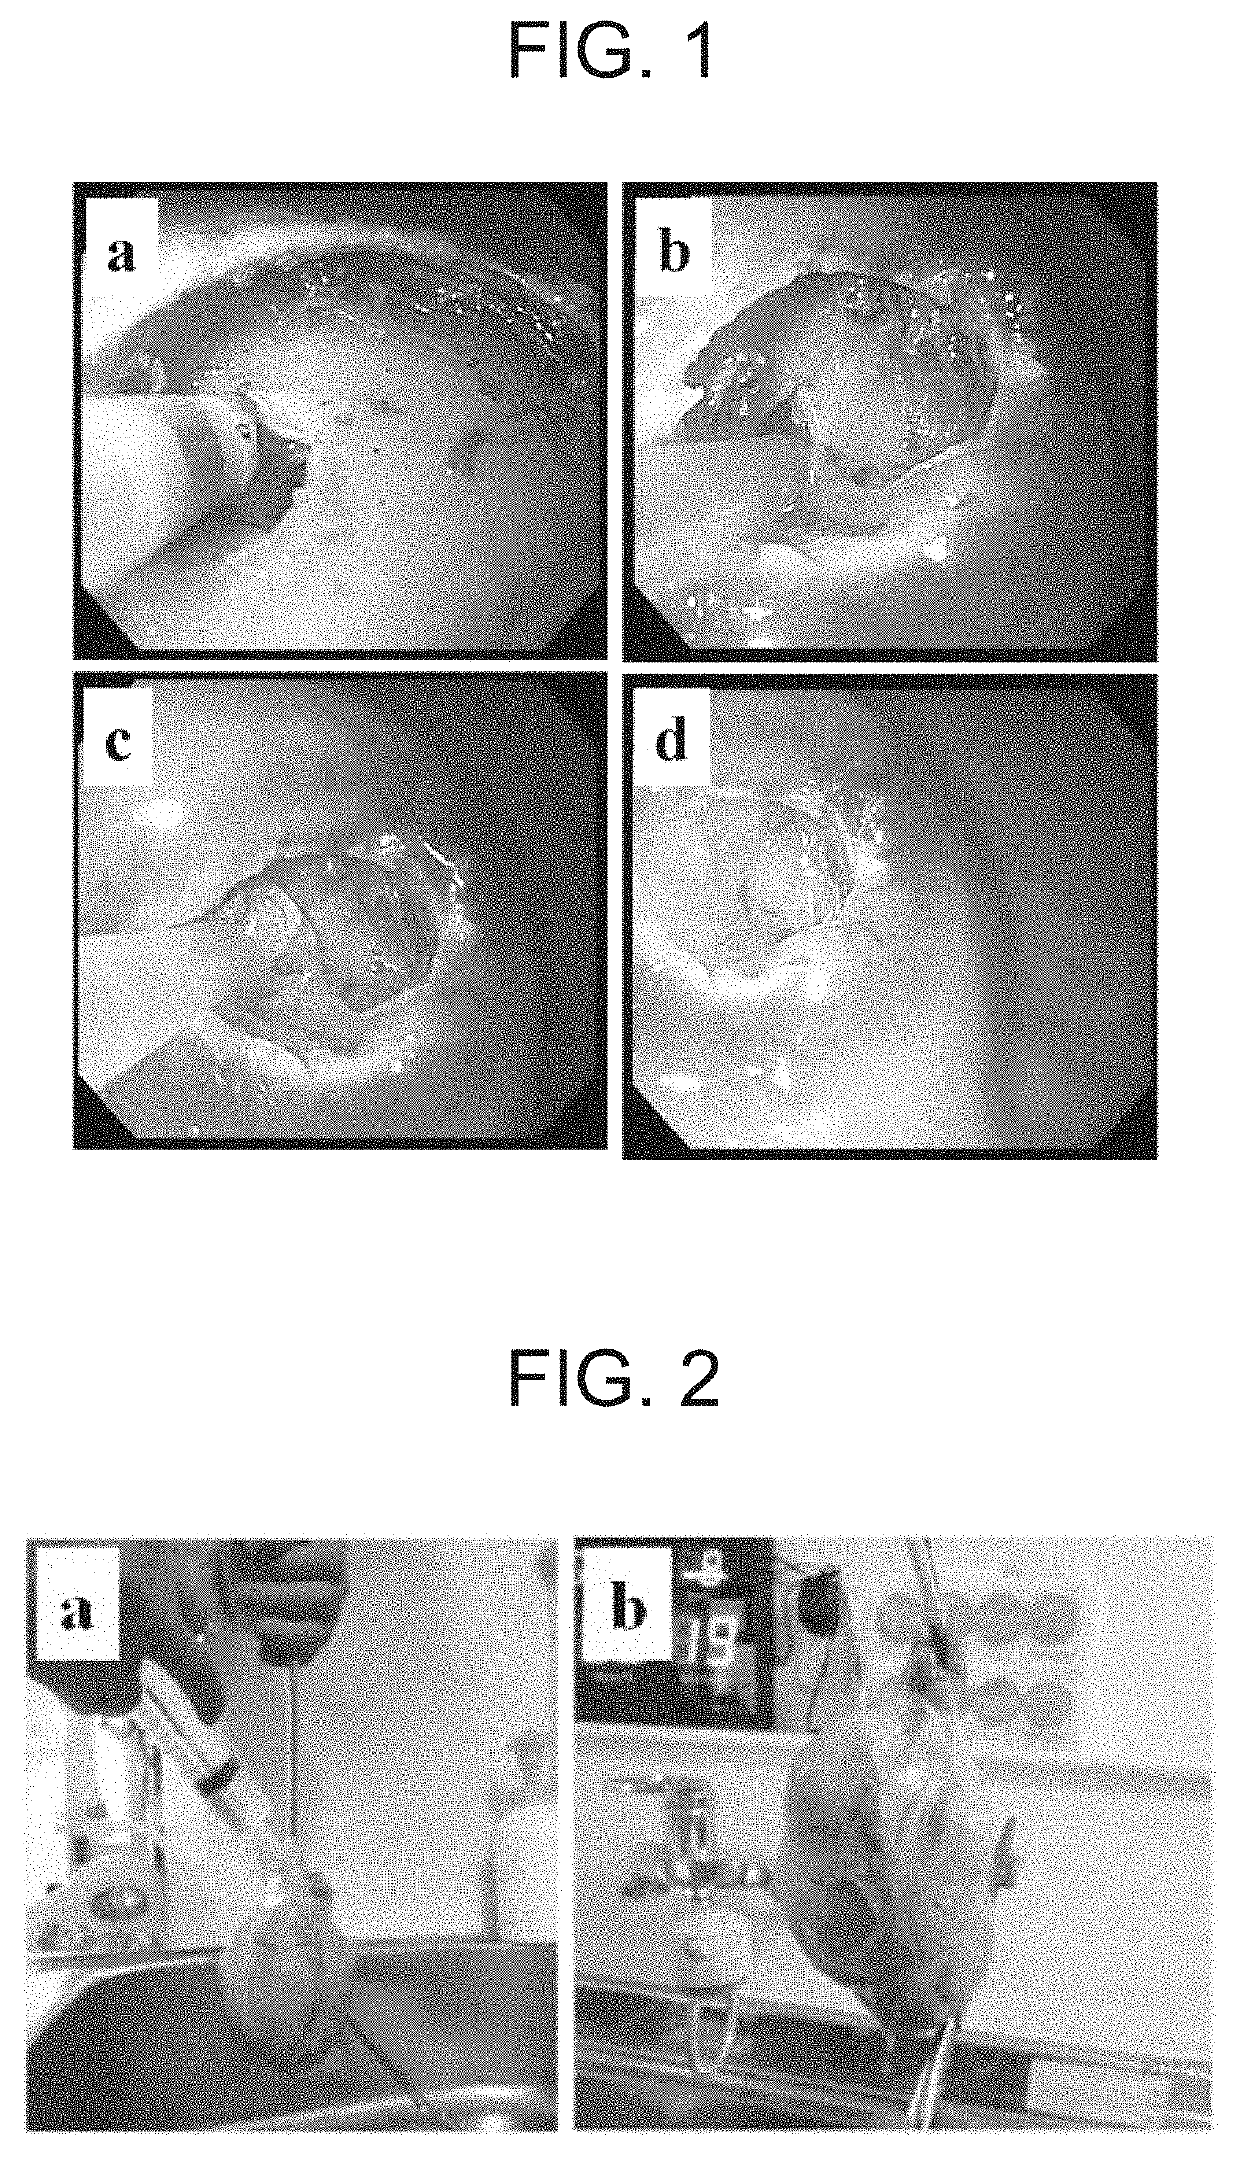 Sol for Occluding Holes in Living Tissue, Protecting Ulcers, and Treating Vascular Embolization